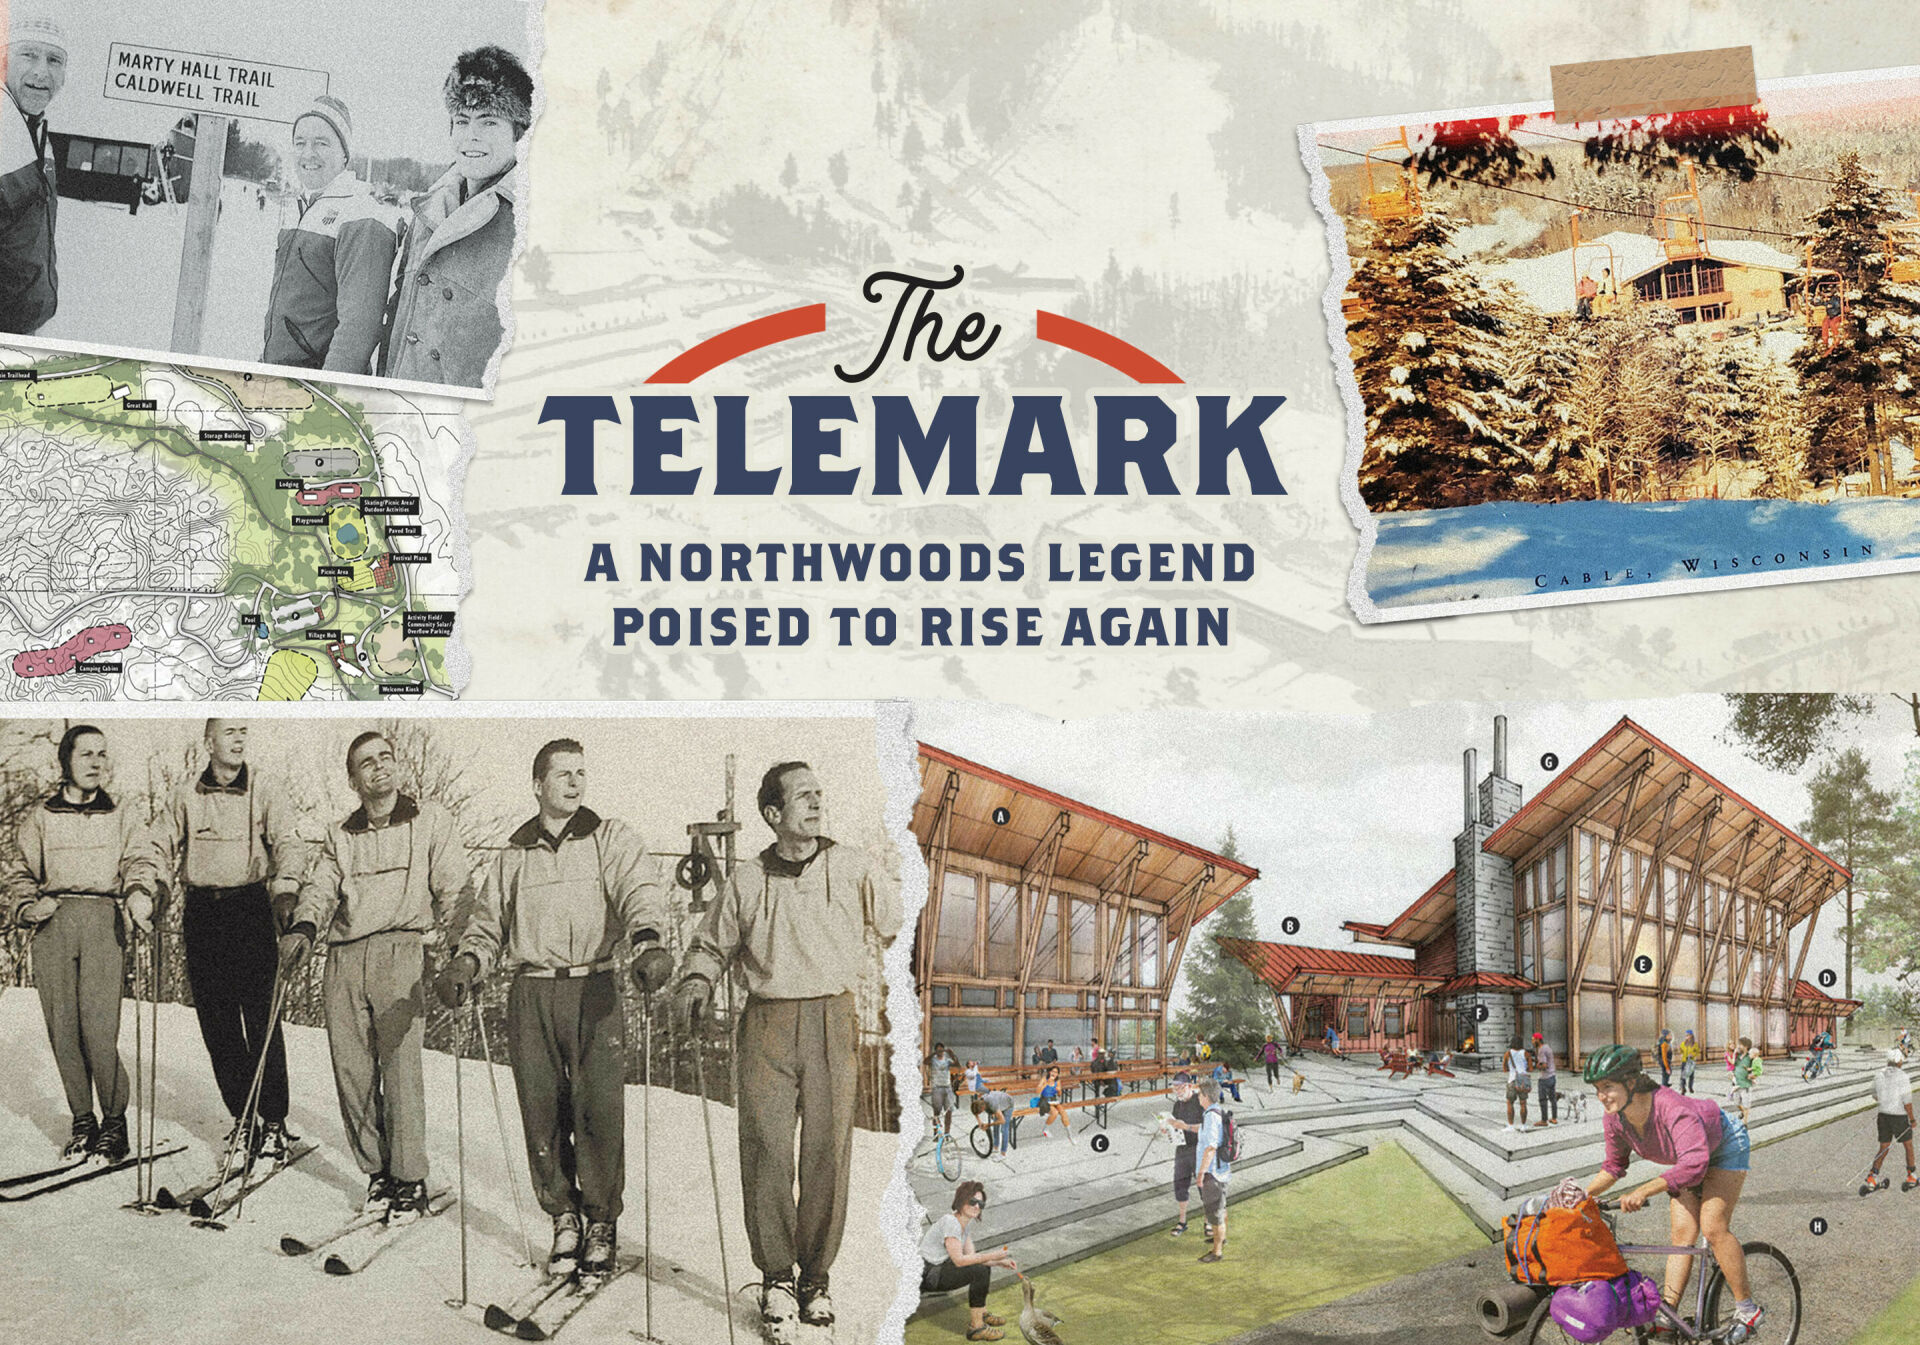 The Telemark - A Northwoods Legend Poised to Rise Again